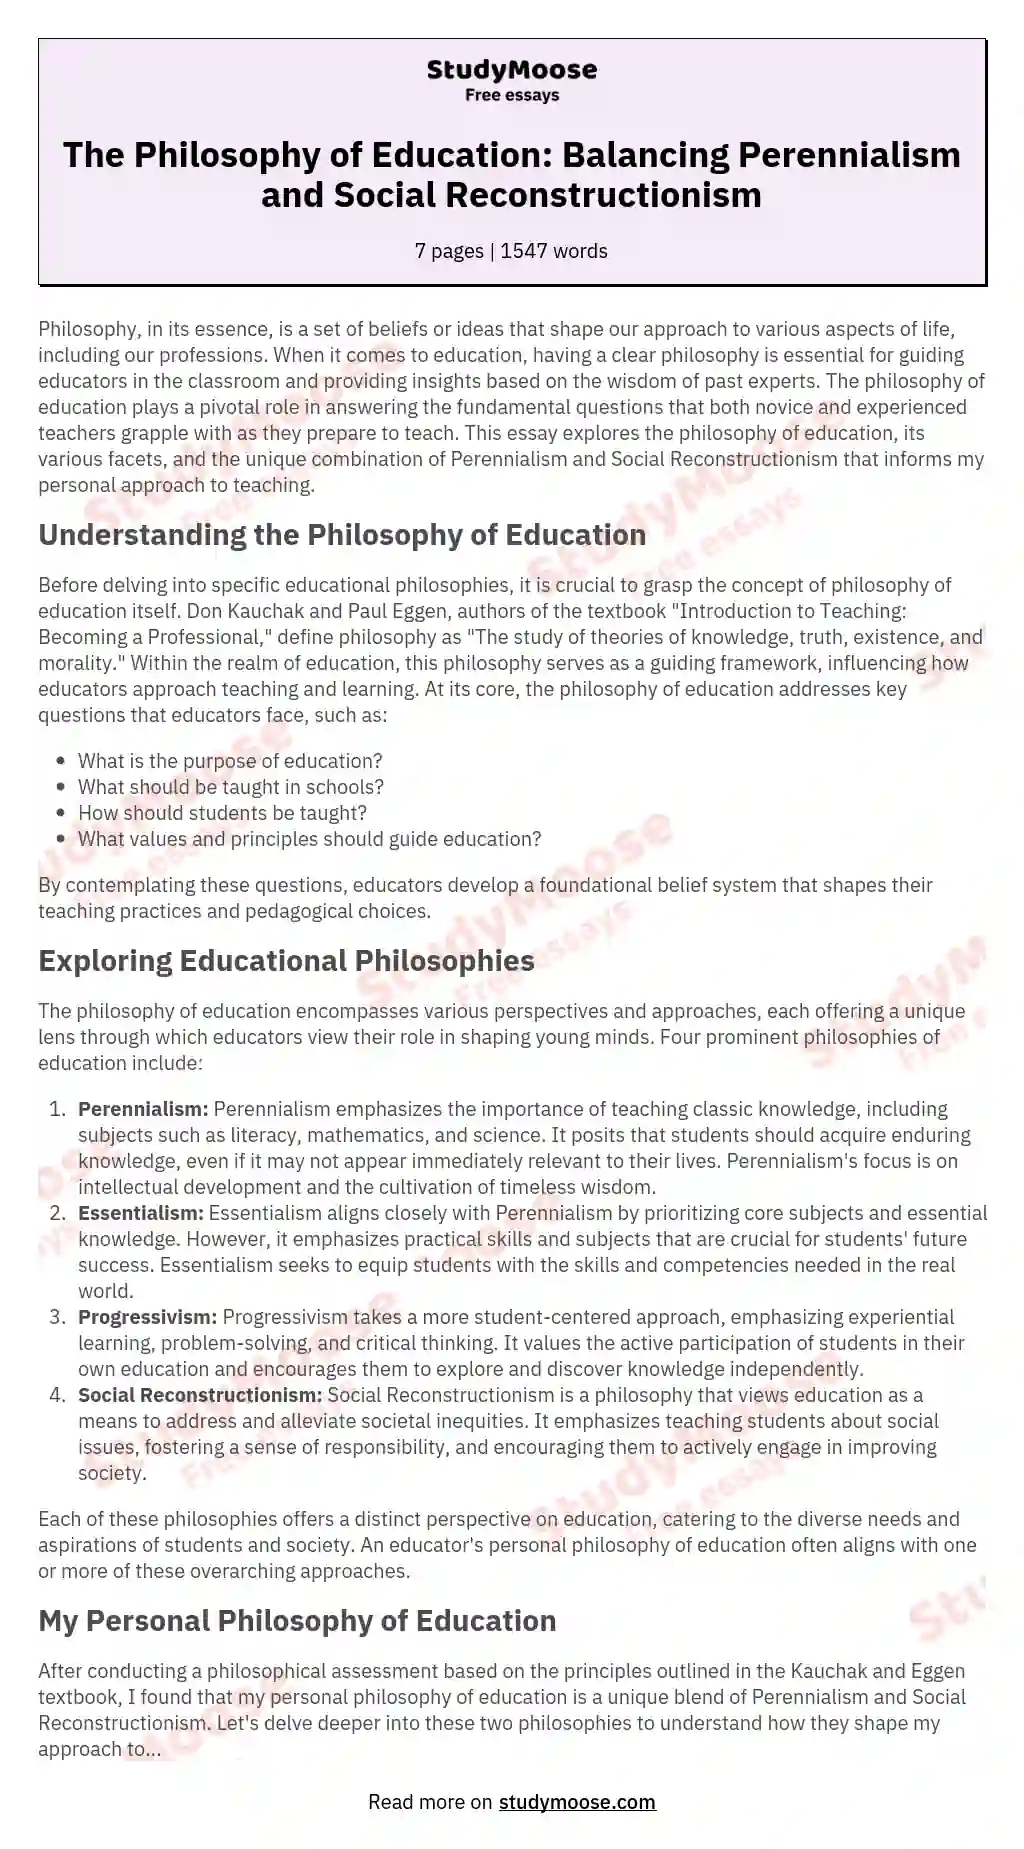 The Philosophy of Education: Balancing Perennialism and Social Reconstructionism essay